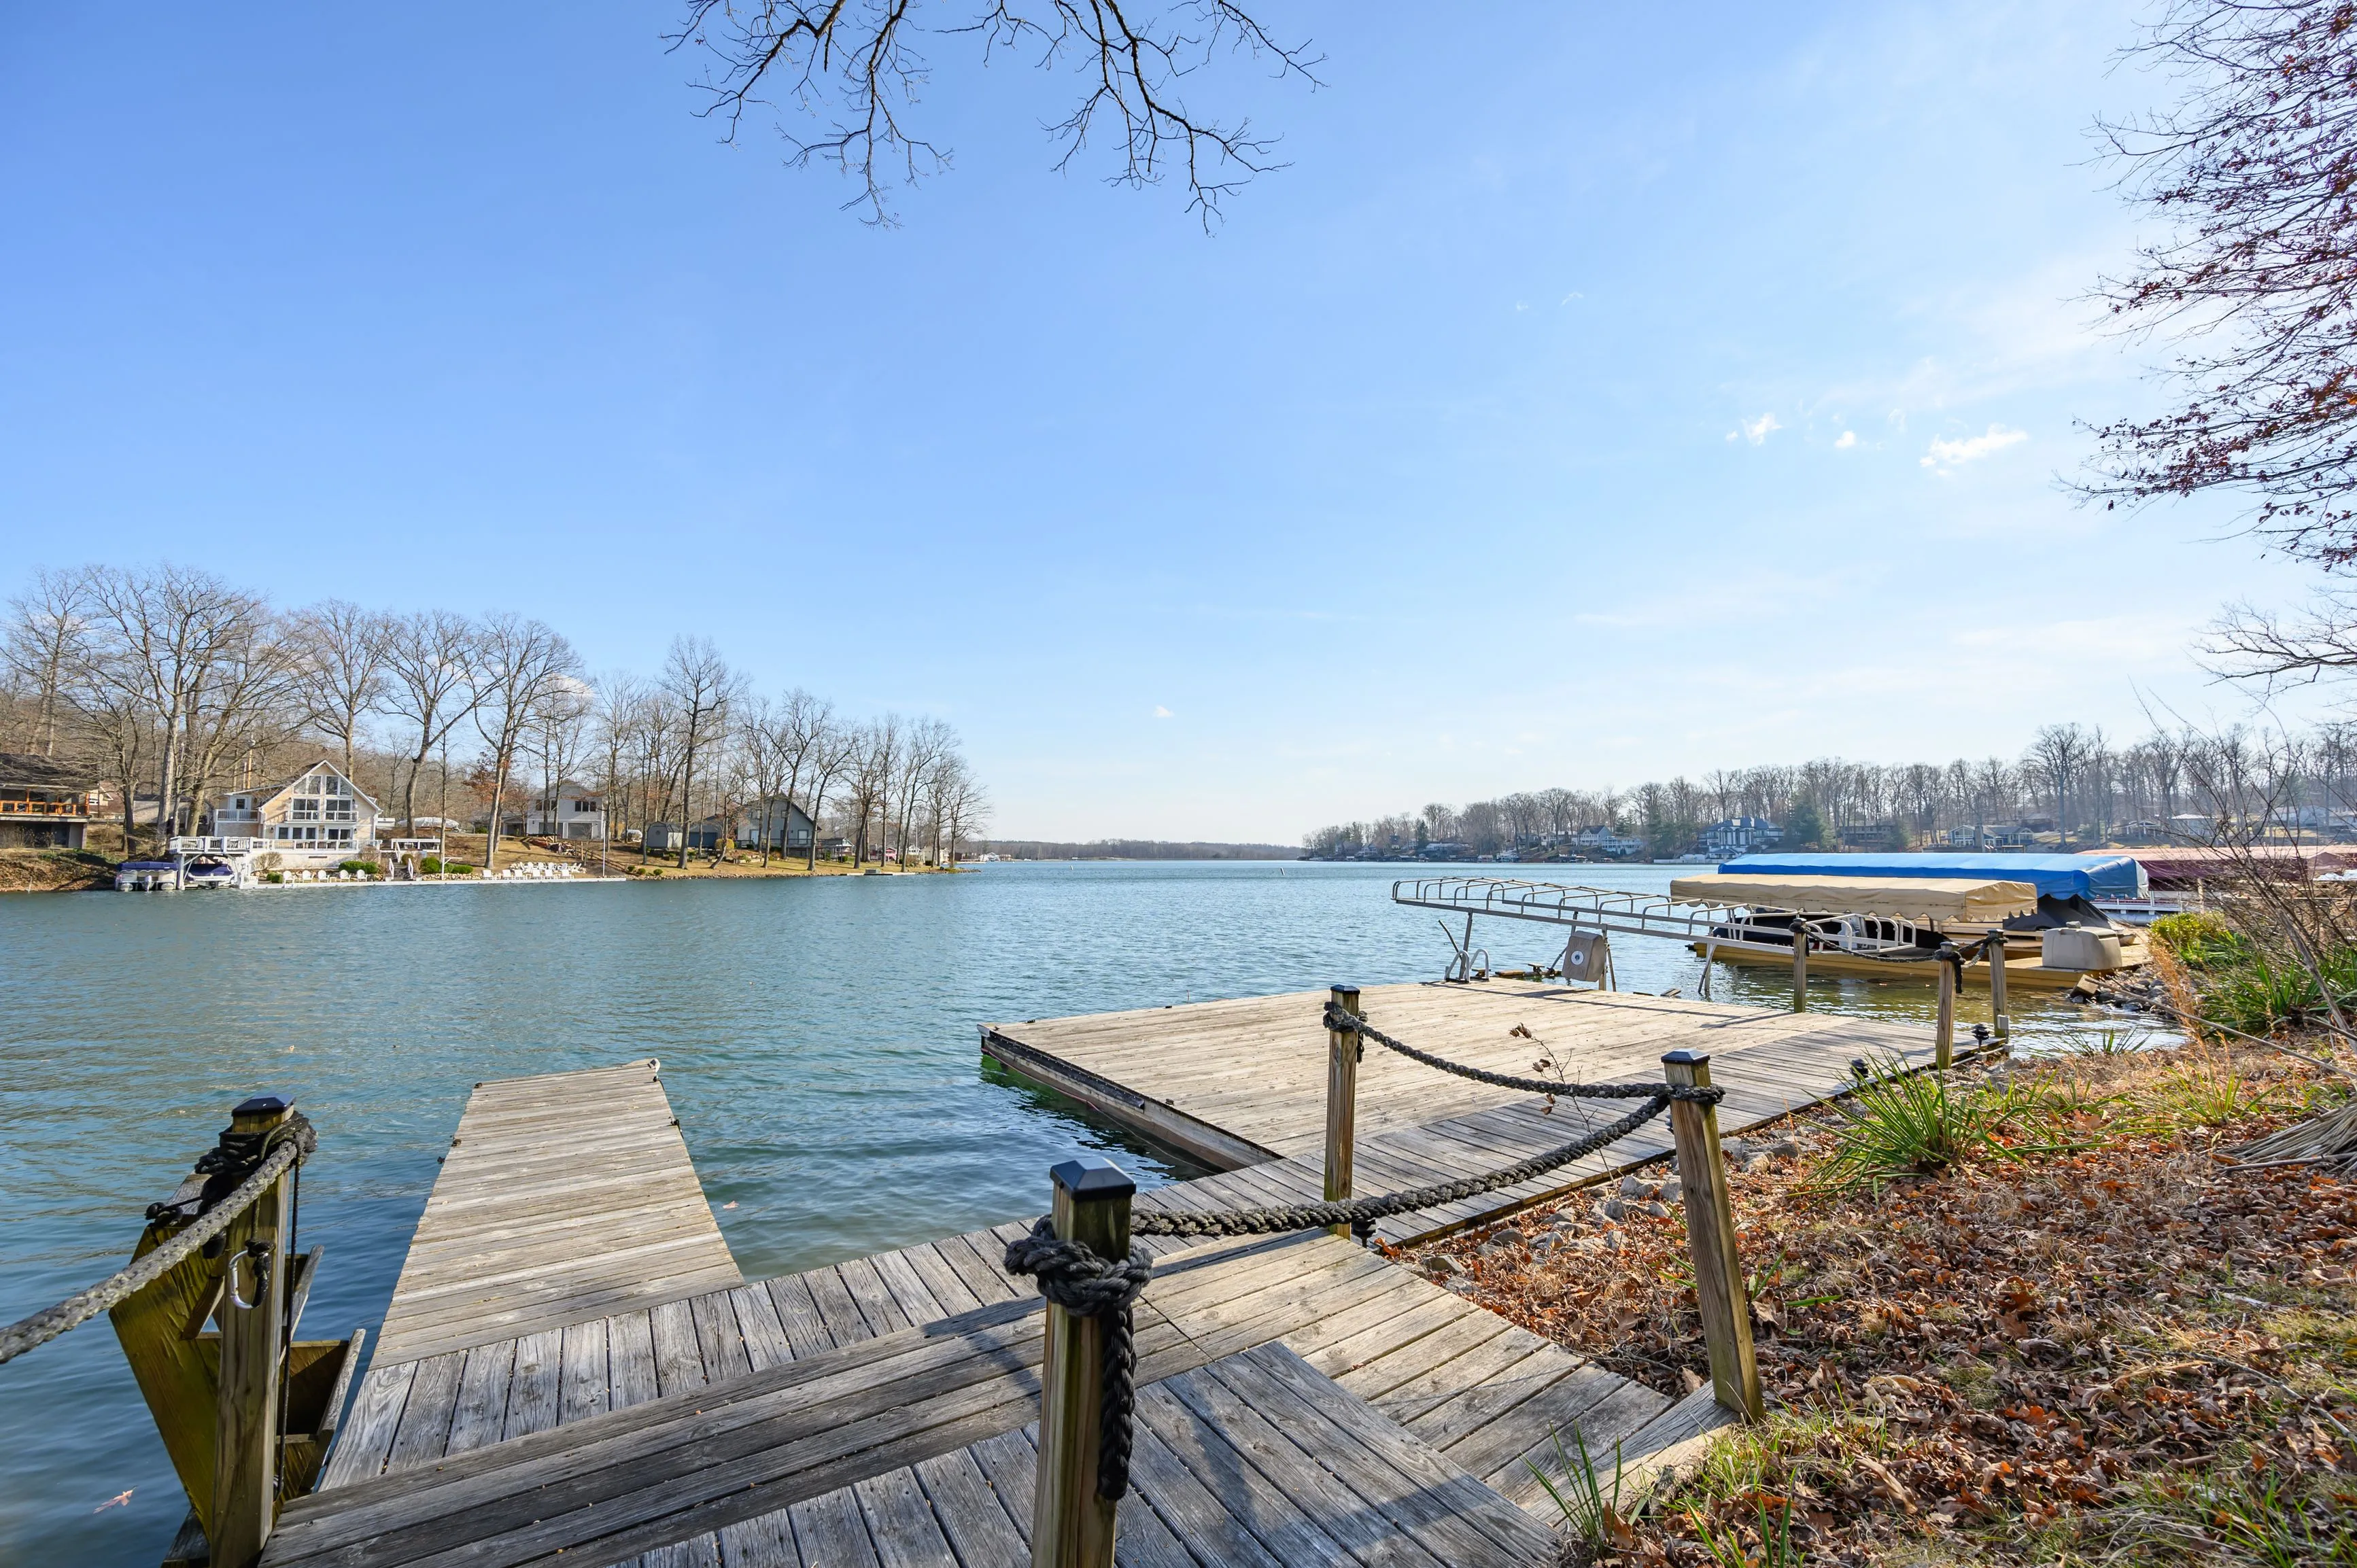 Wooden dock overlooking a tranquil lake with a boat cover on the right and residential houses in the background under a clear blue sky.